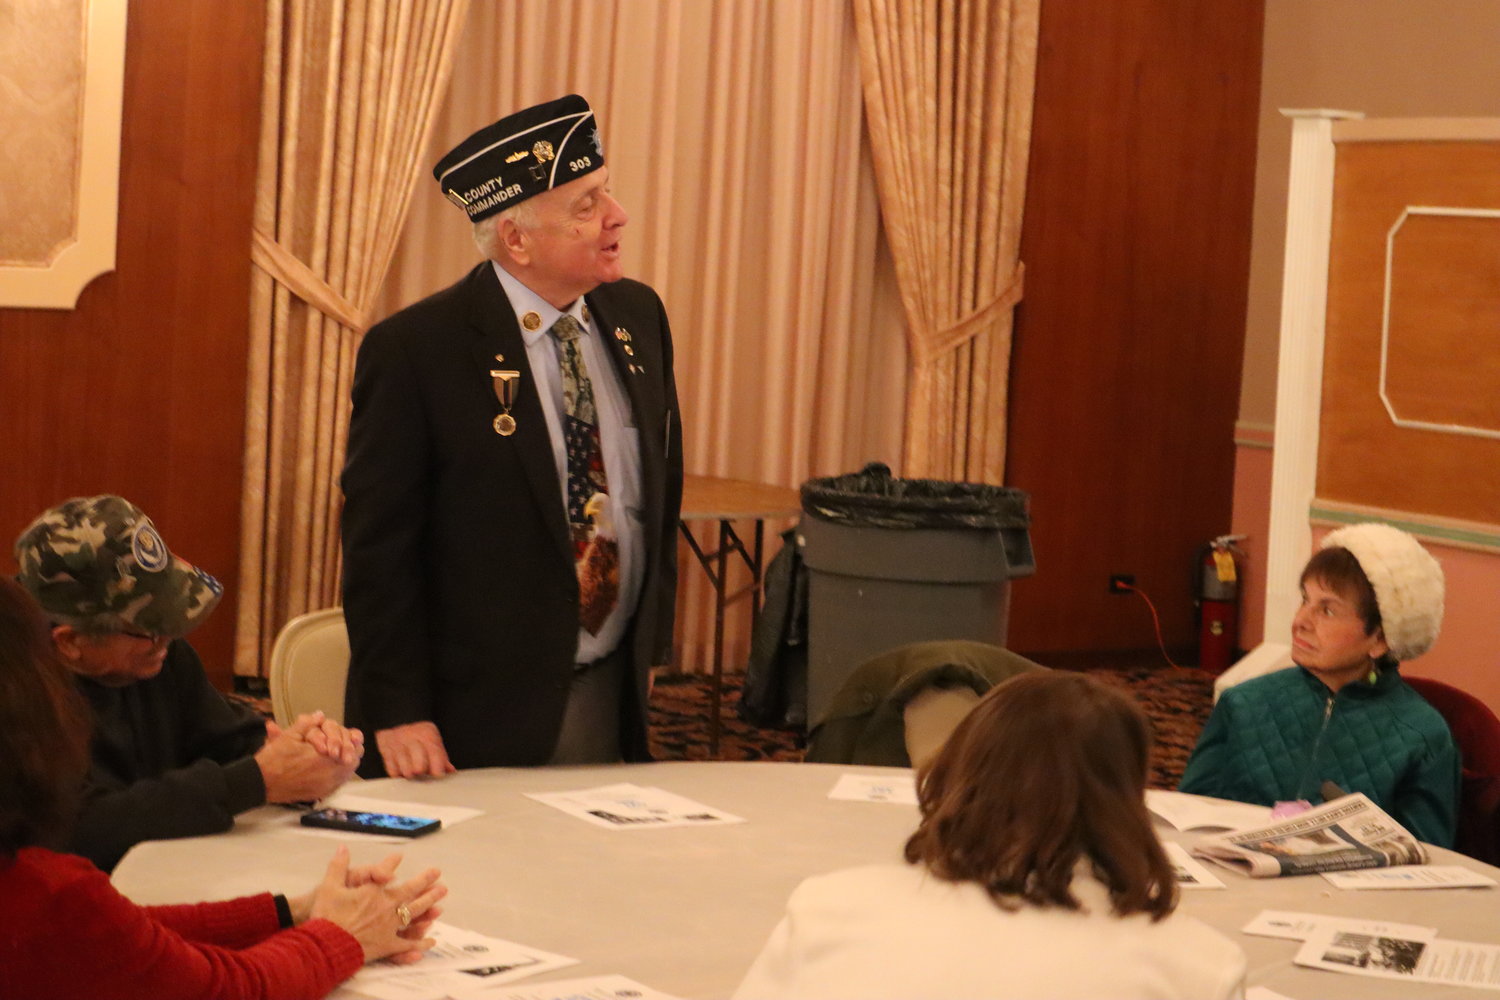 Joe Scarola, commander of the Nassau County American Legion and a member of Legion Post 303 in Rockville Centre, was welcomed to celebrate the organization’s 127th anniversary along with longstanding members of the Jewish War Veterans.